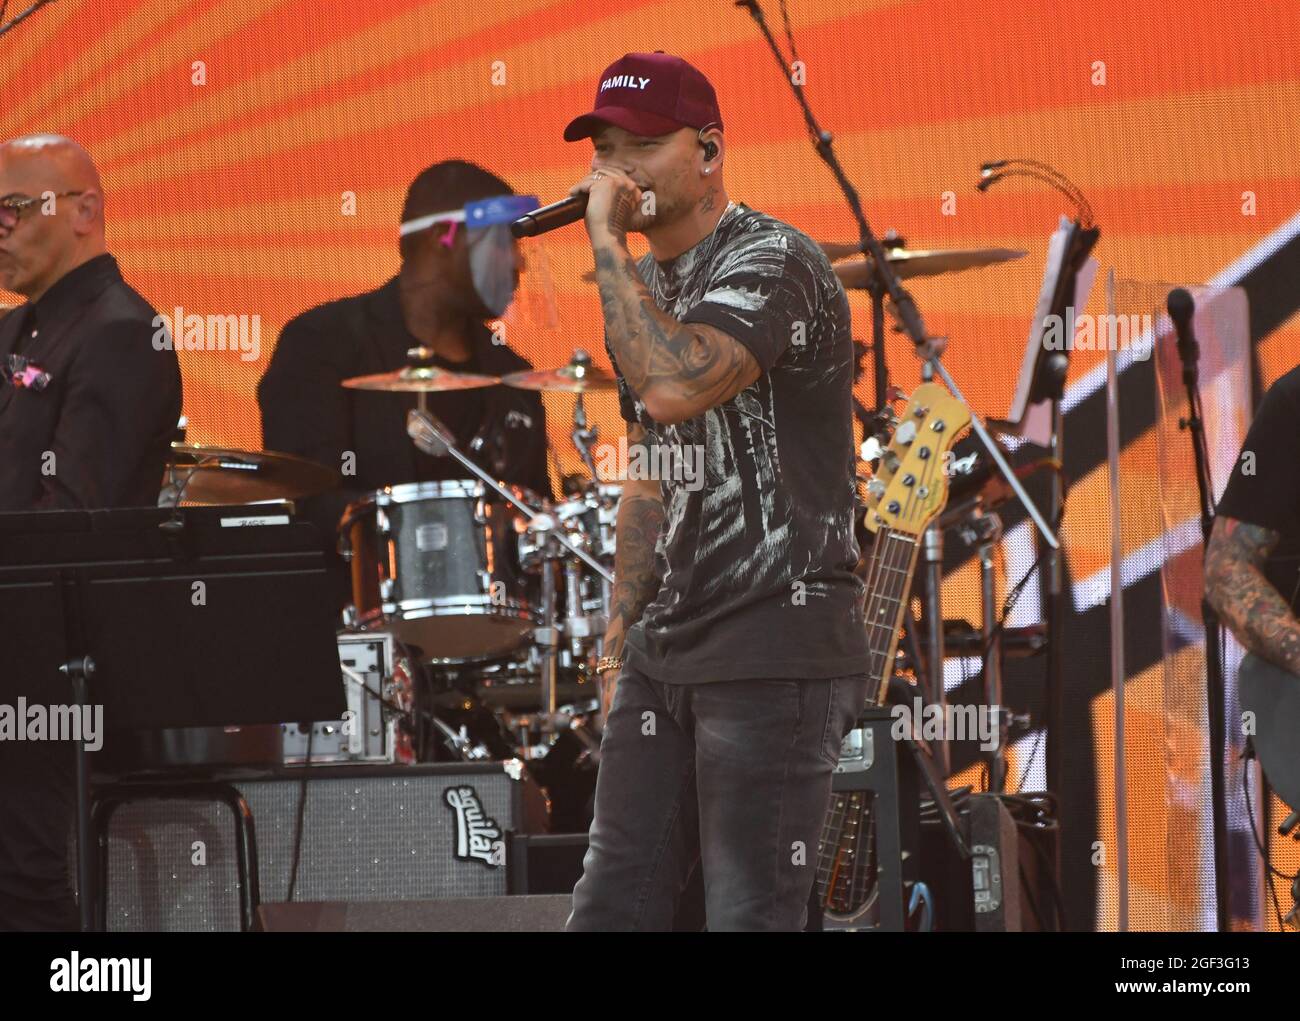 NEW YORK, NEW YORK - AUGUST 21: Kane Brown performs onstage during We Love NYC: The Homecoming Concert Produced by NYC, Clive Davis, and Live Nation on August 21, 2021 in New York City. (Photo by John Atashian) Stock Photo